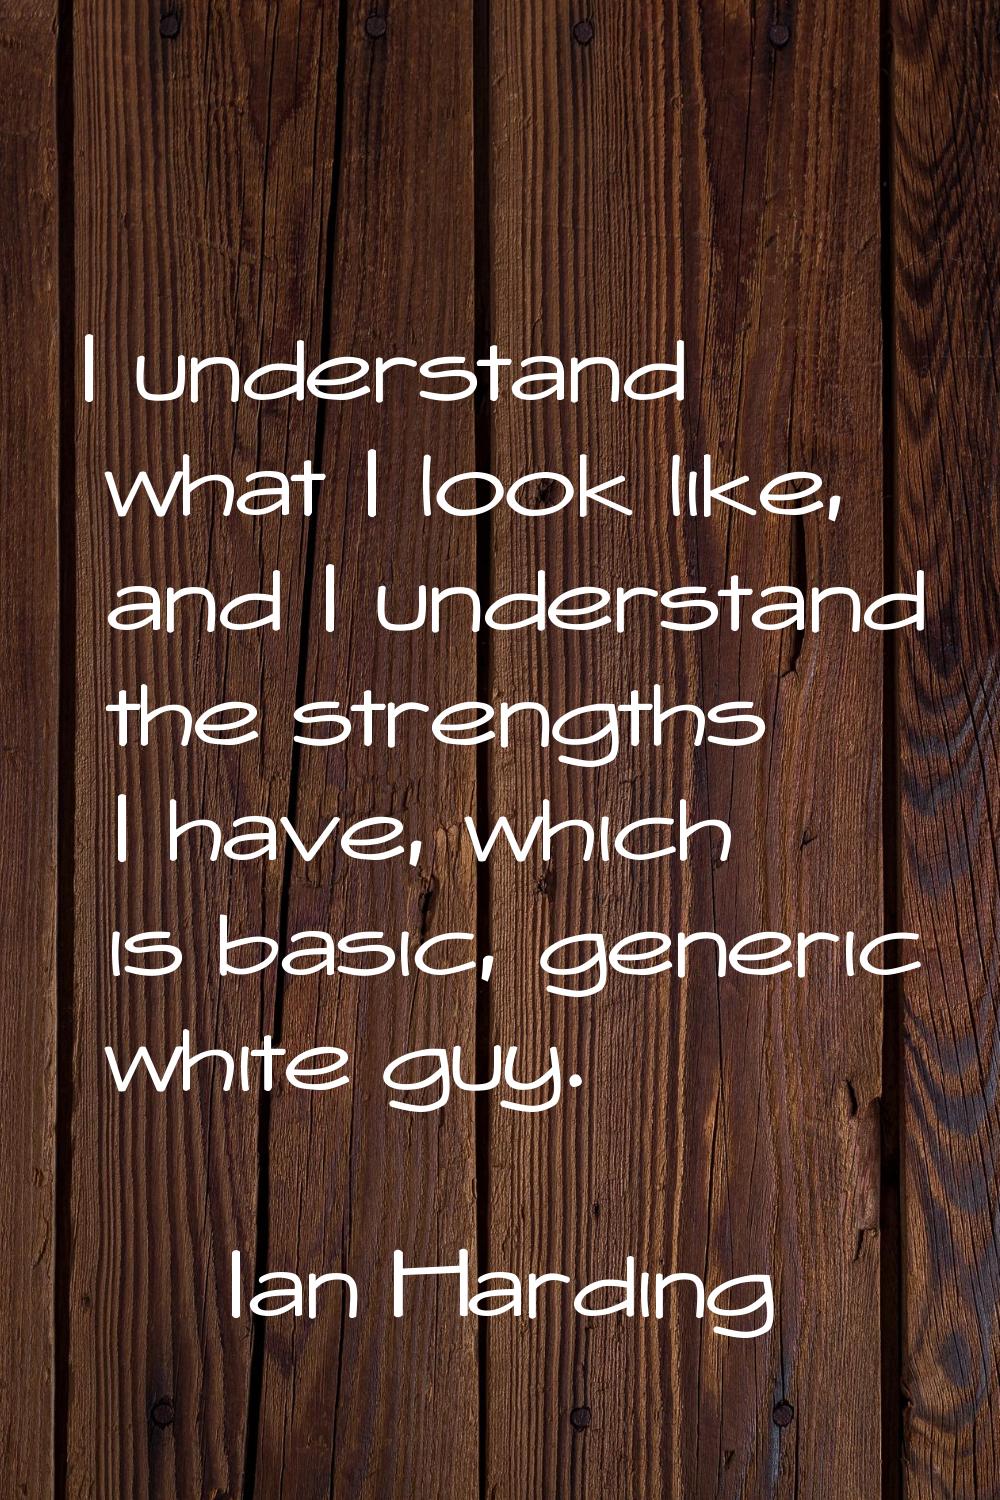 I understand what I look like, and I understand the strengths I have, which is basic, generic white